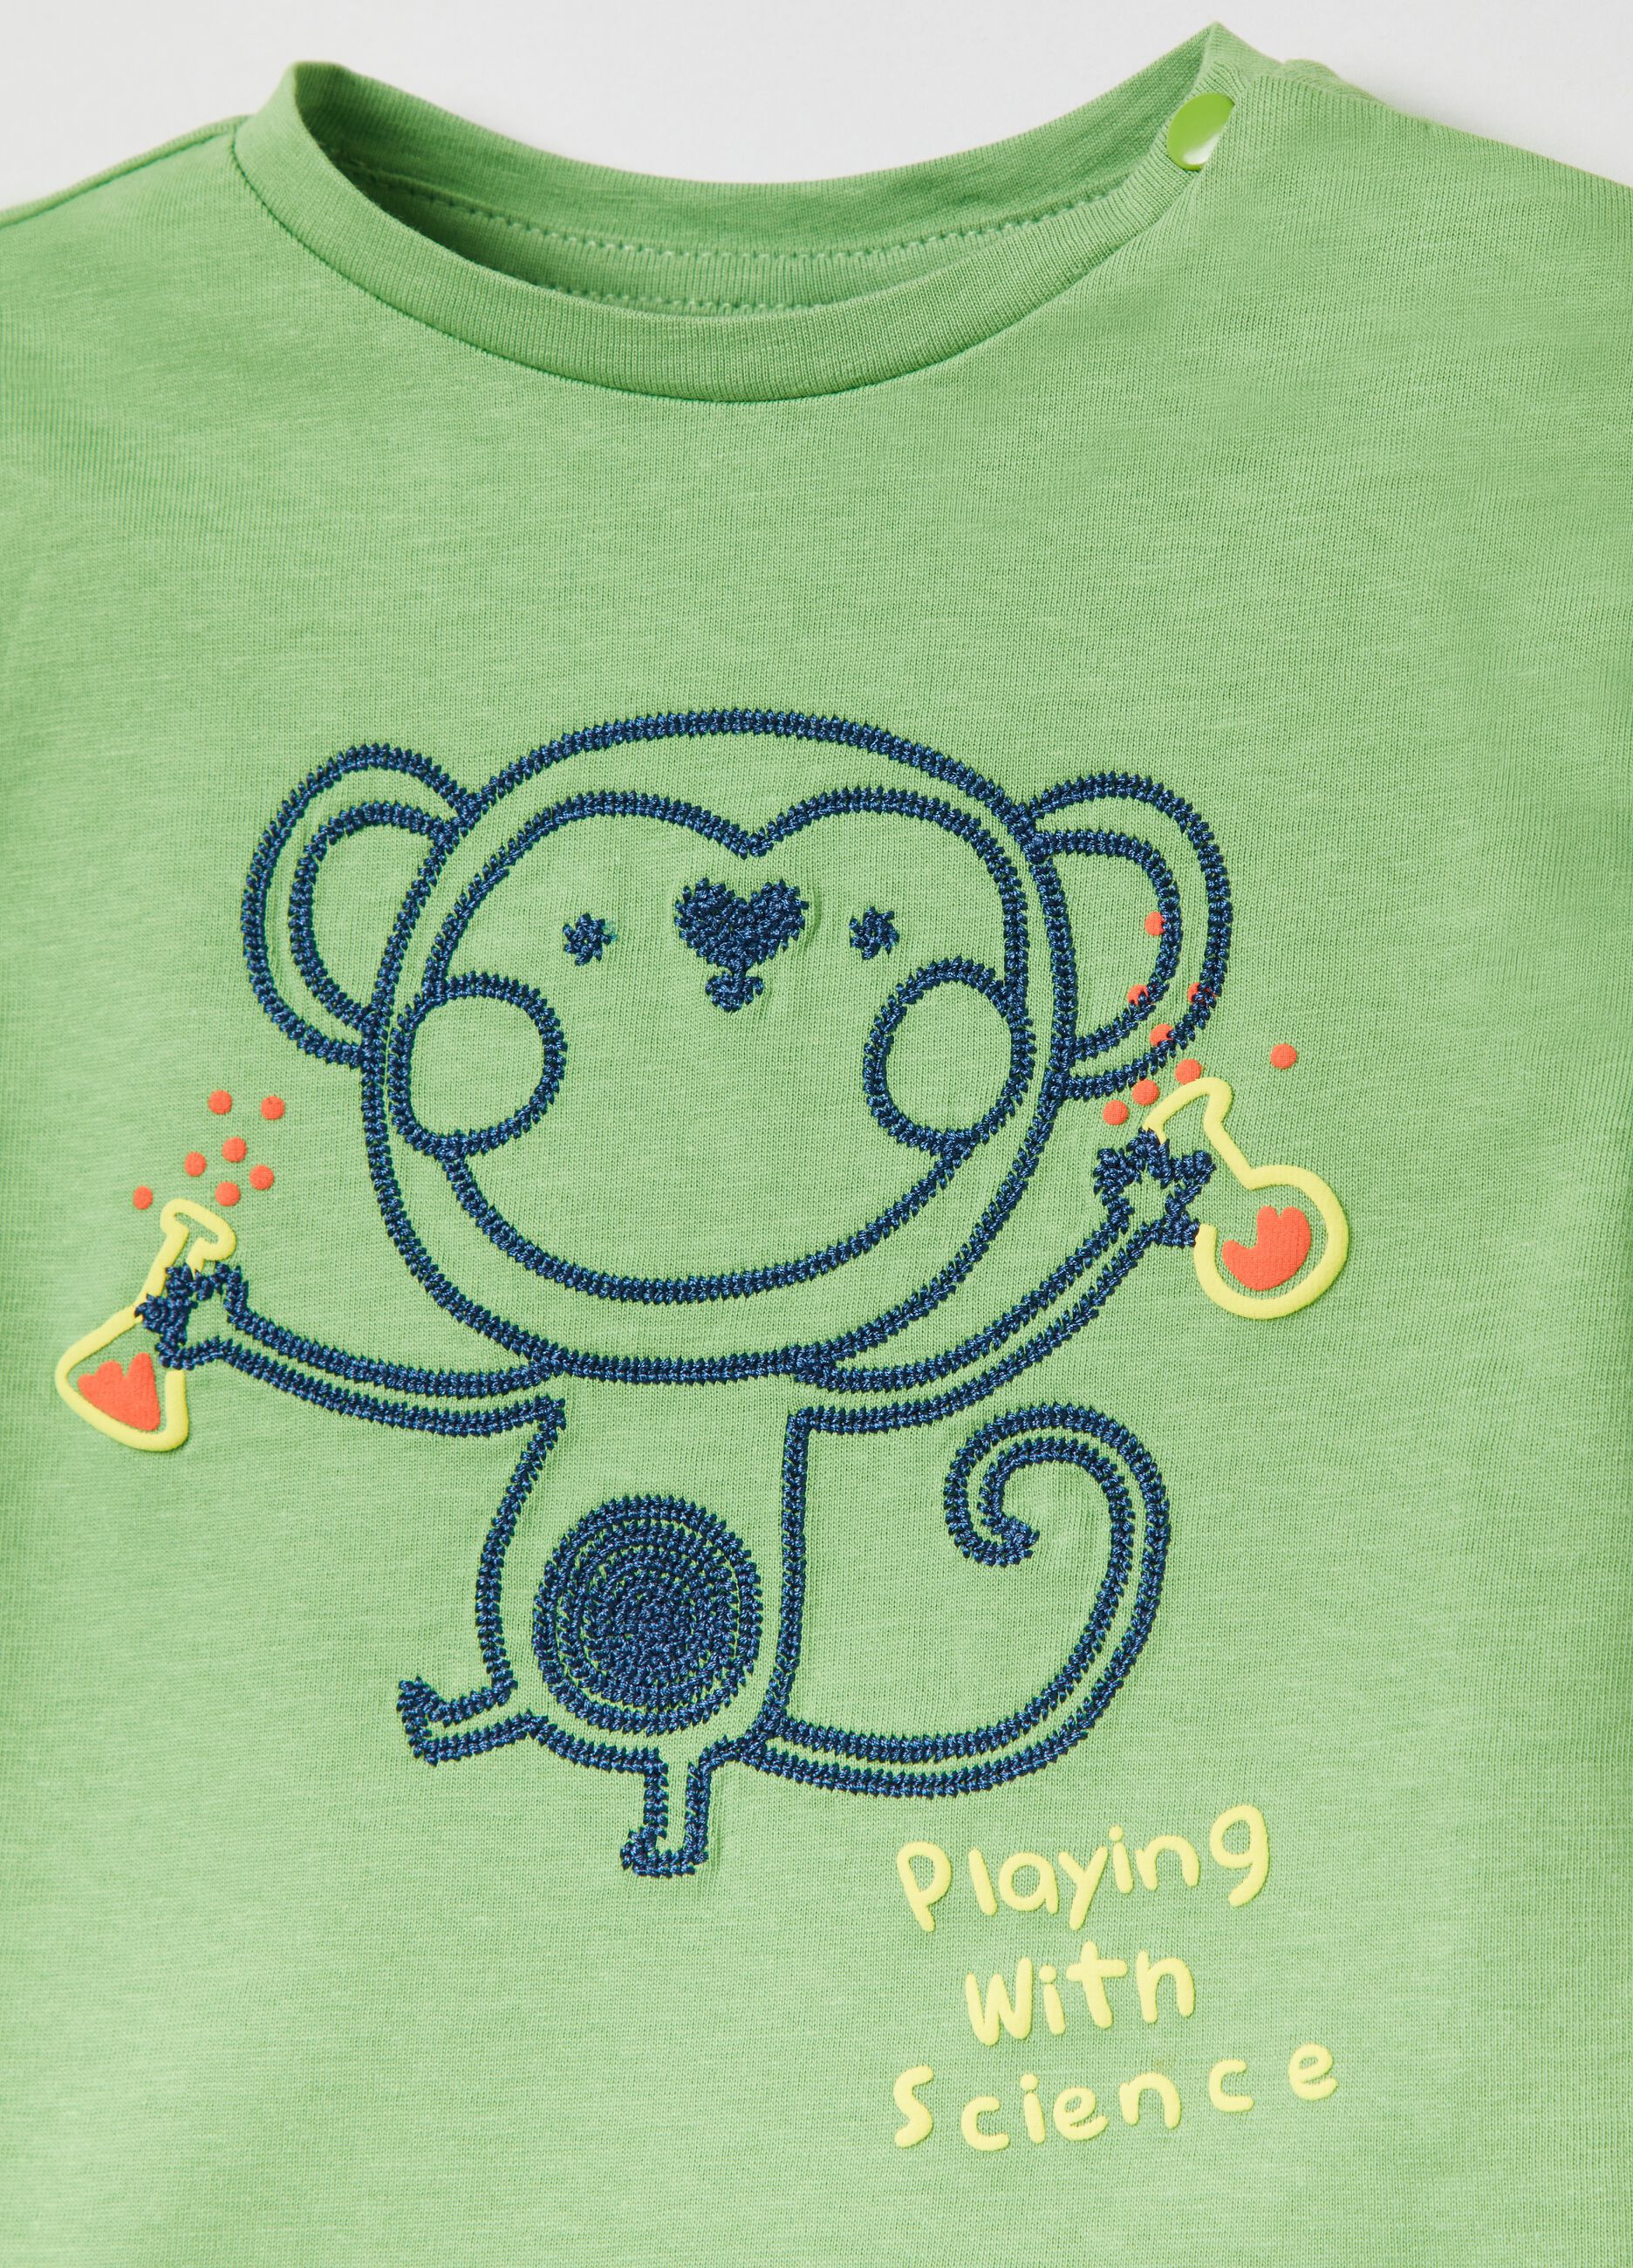 T-shirt with embroidered monkey